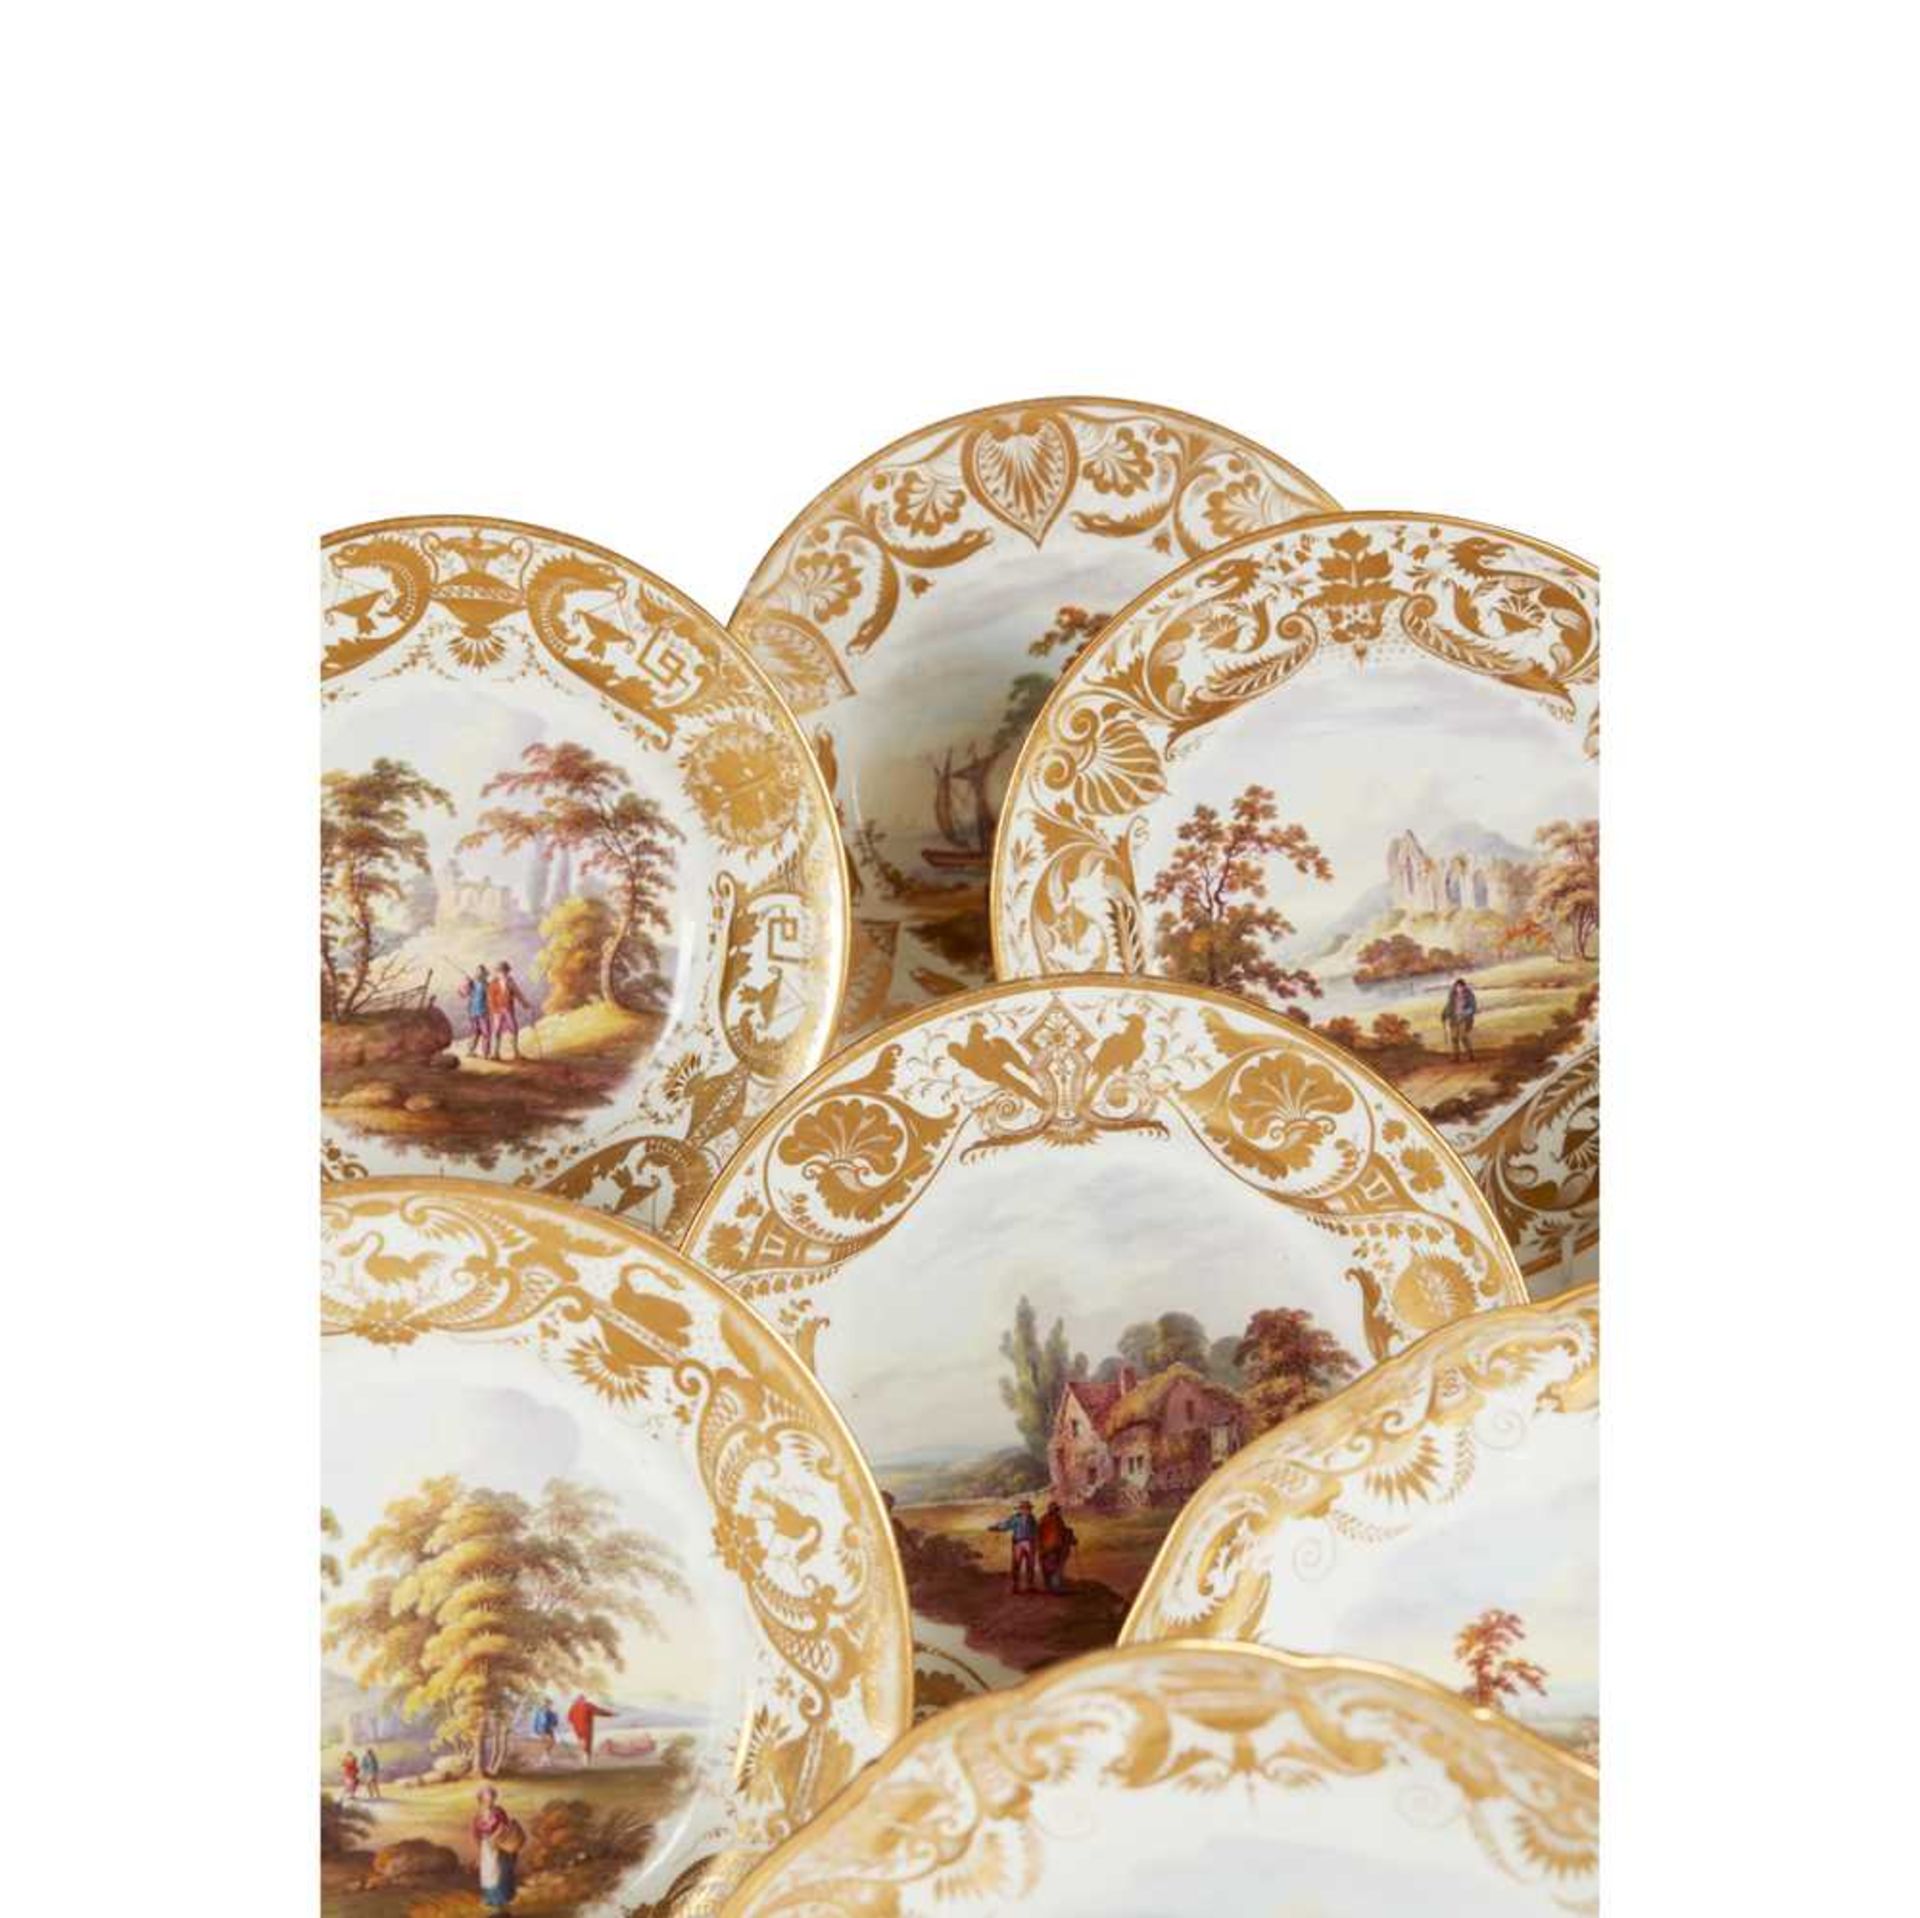 MATCHED DERBY PORCELAIN TOPOGRAPHICAL PART DESSERT SERVICE EARLY 19TH CENTURY - Image 6 of 8